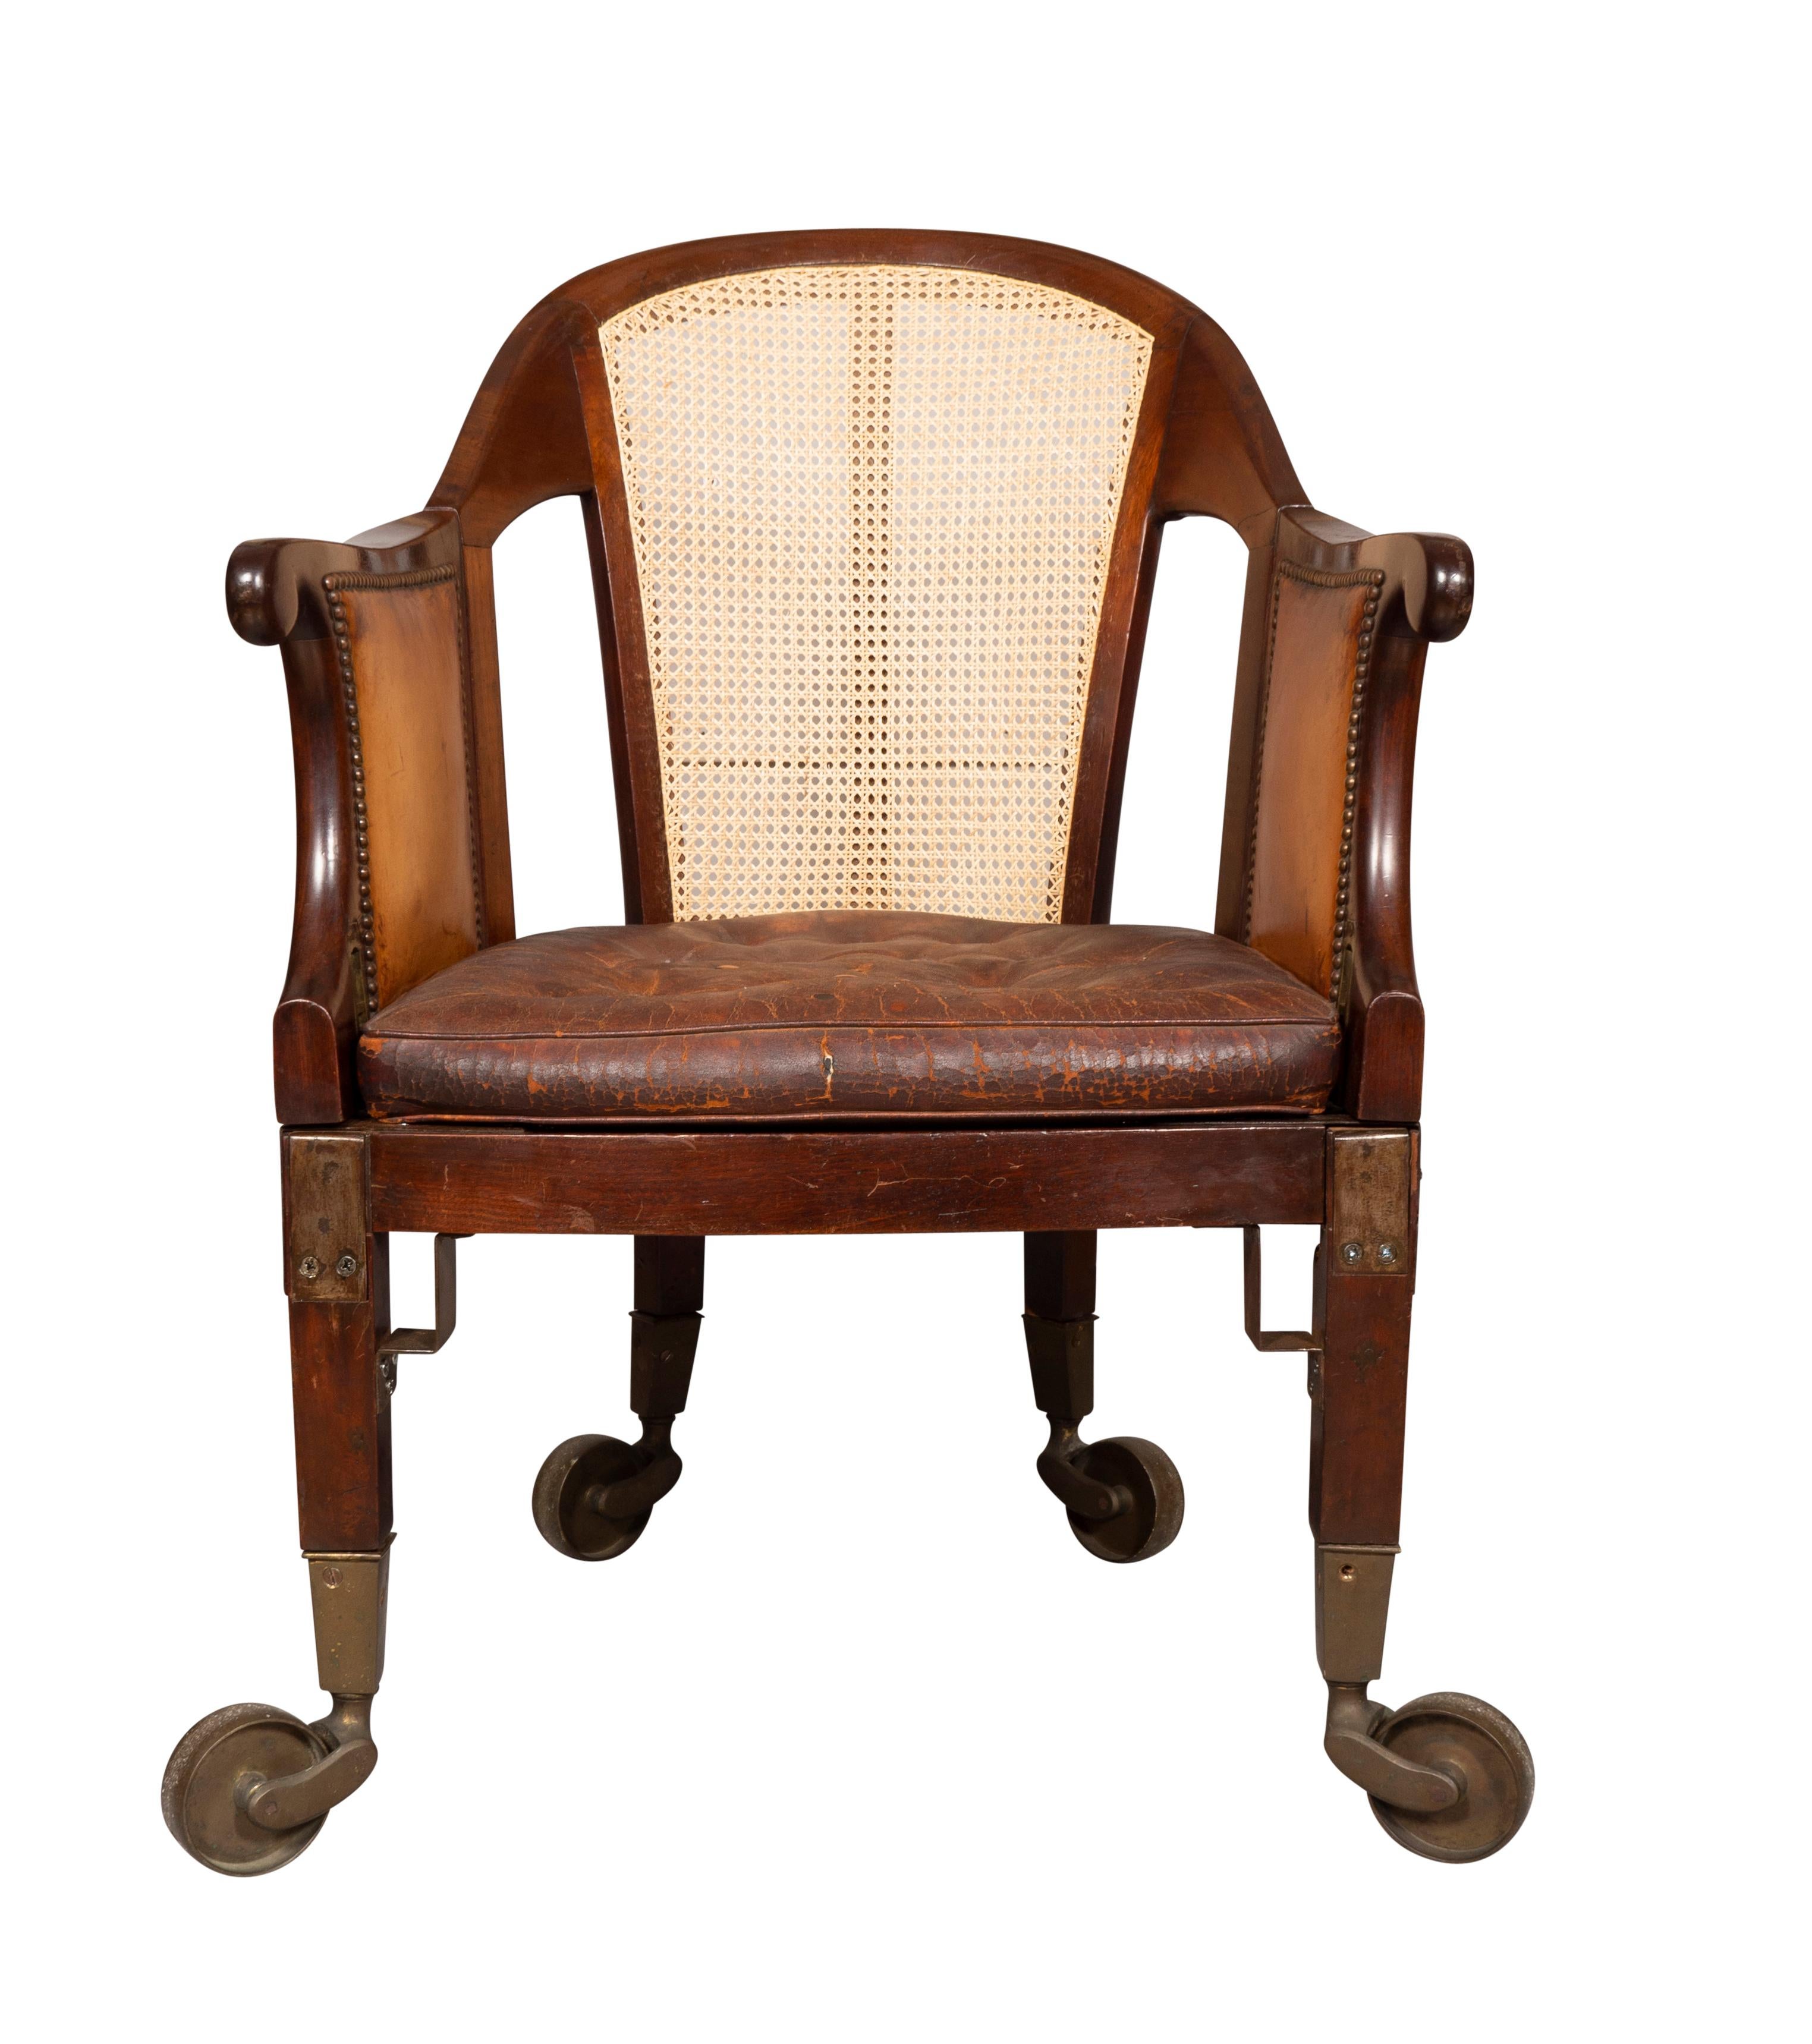 English Unusual Regency Mahogany and Brass Campaign Chair For Sale